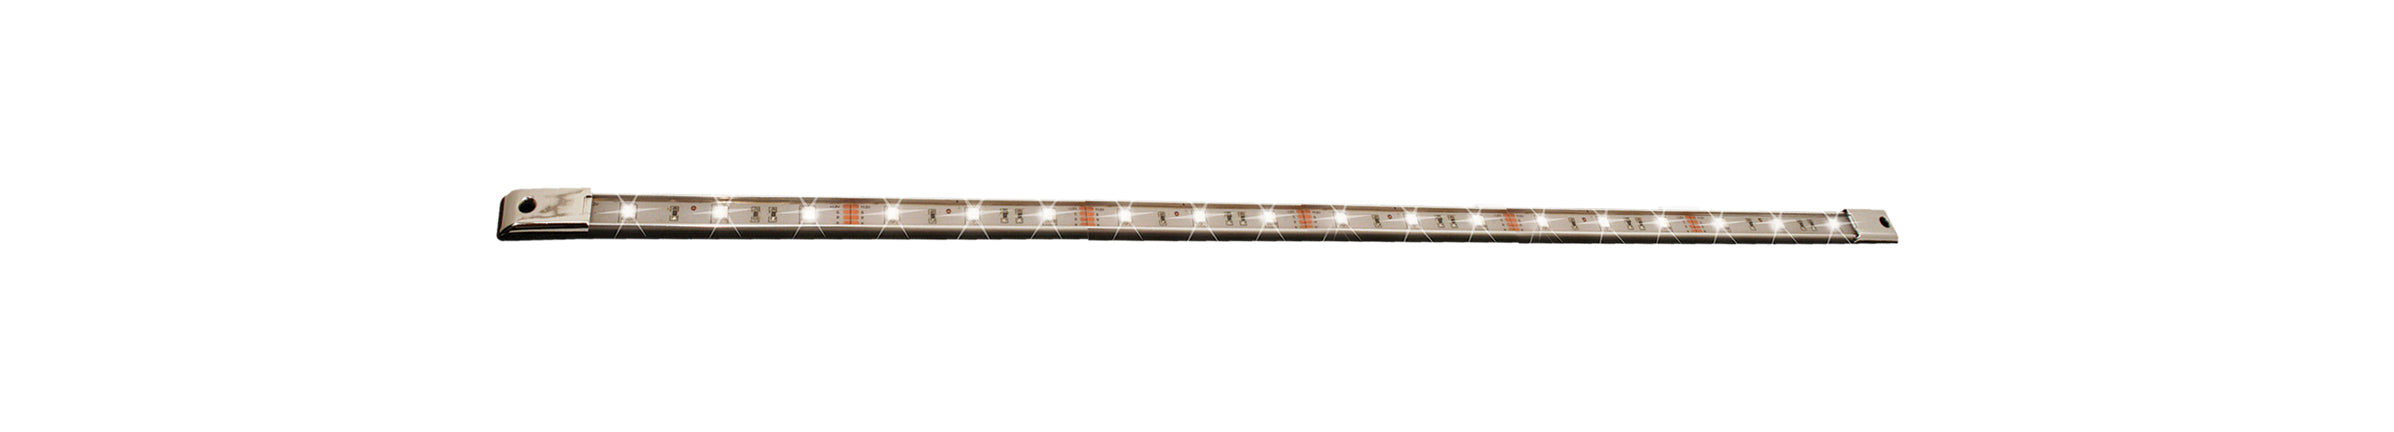 Discontinued - 25.5in Marine LED Custom Accent Bar (White) - USA Made Race Sport Lighting